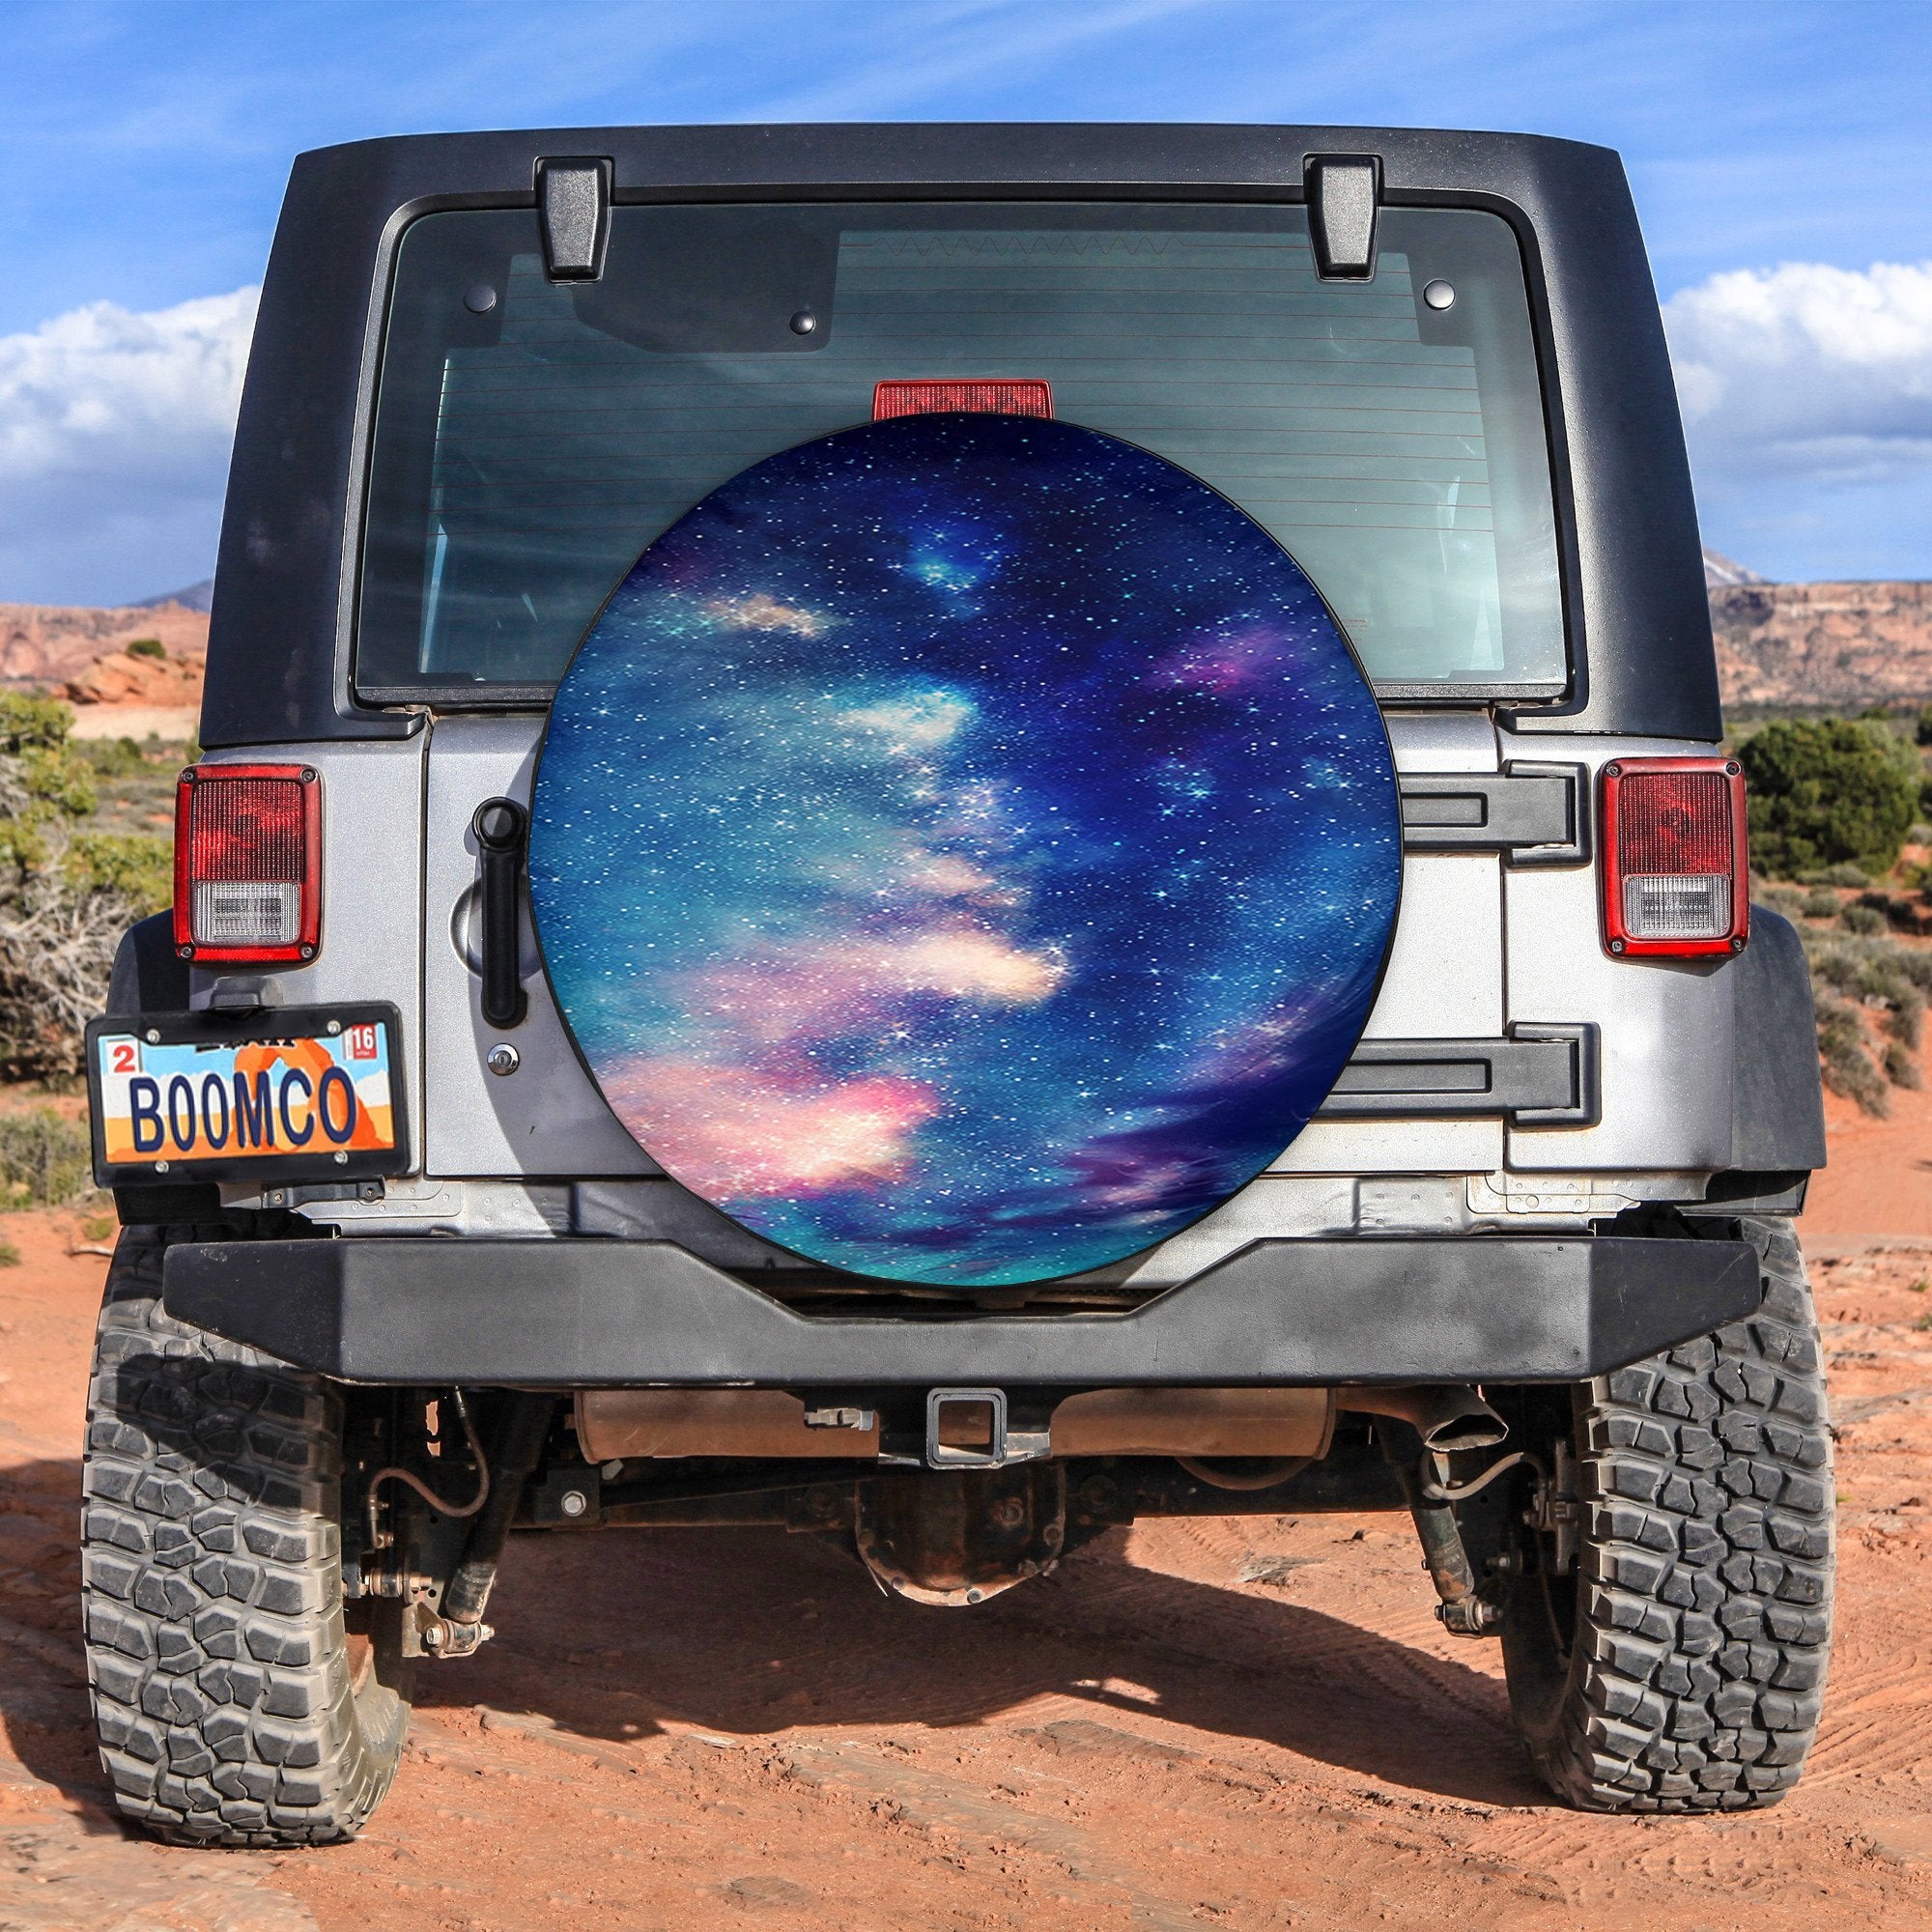 Stary Sky Spare Tire Cover Gift For Campers